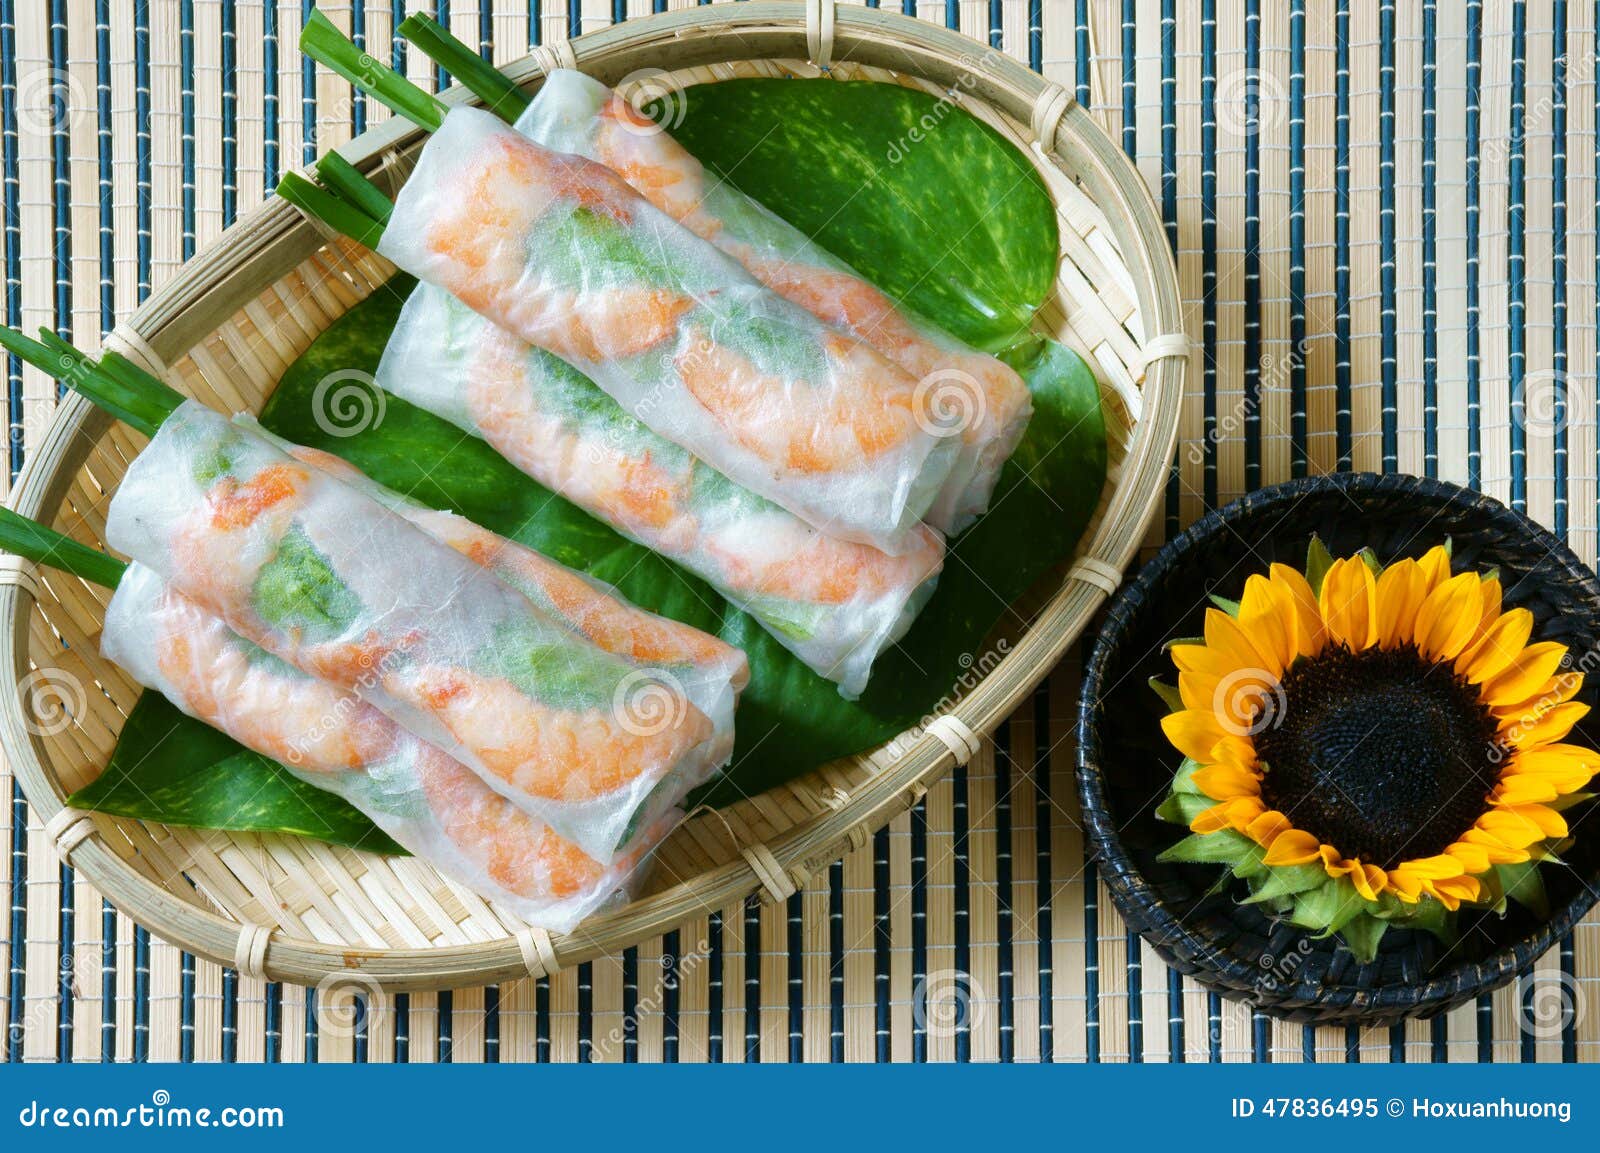 Vietnamese food, goi cuon is street food, roll that delicious, wrapped 